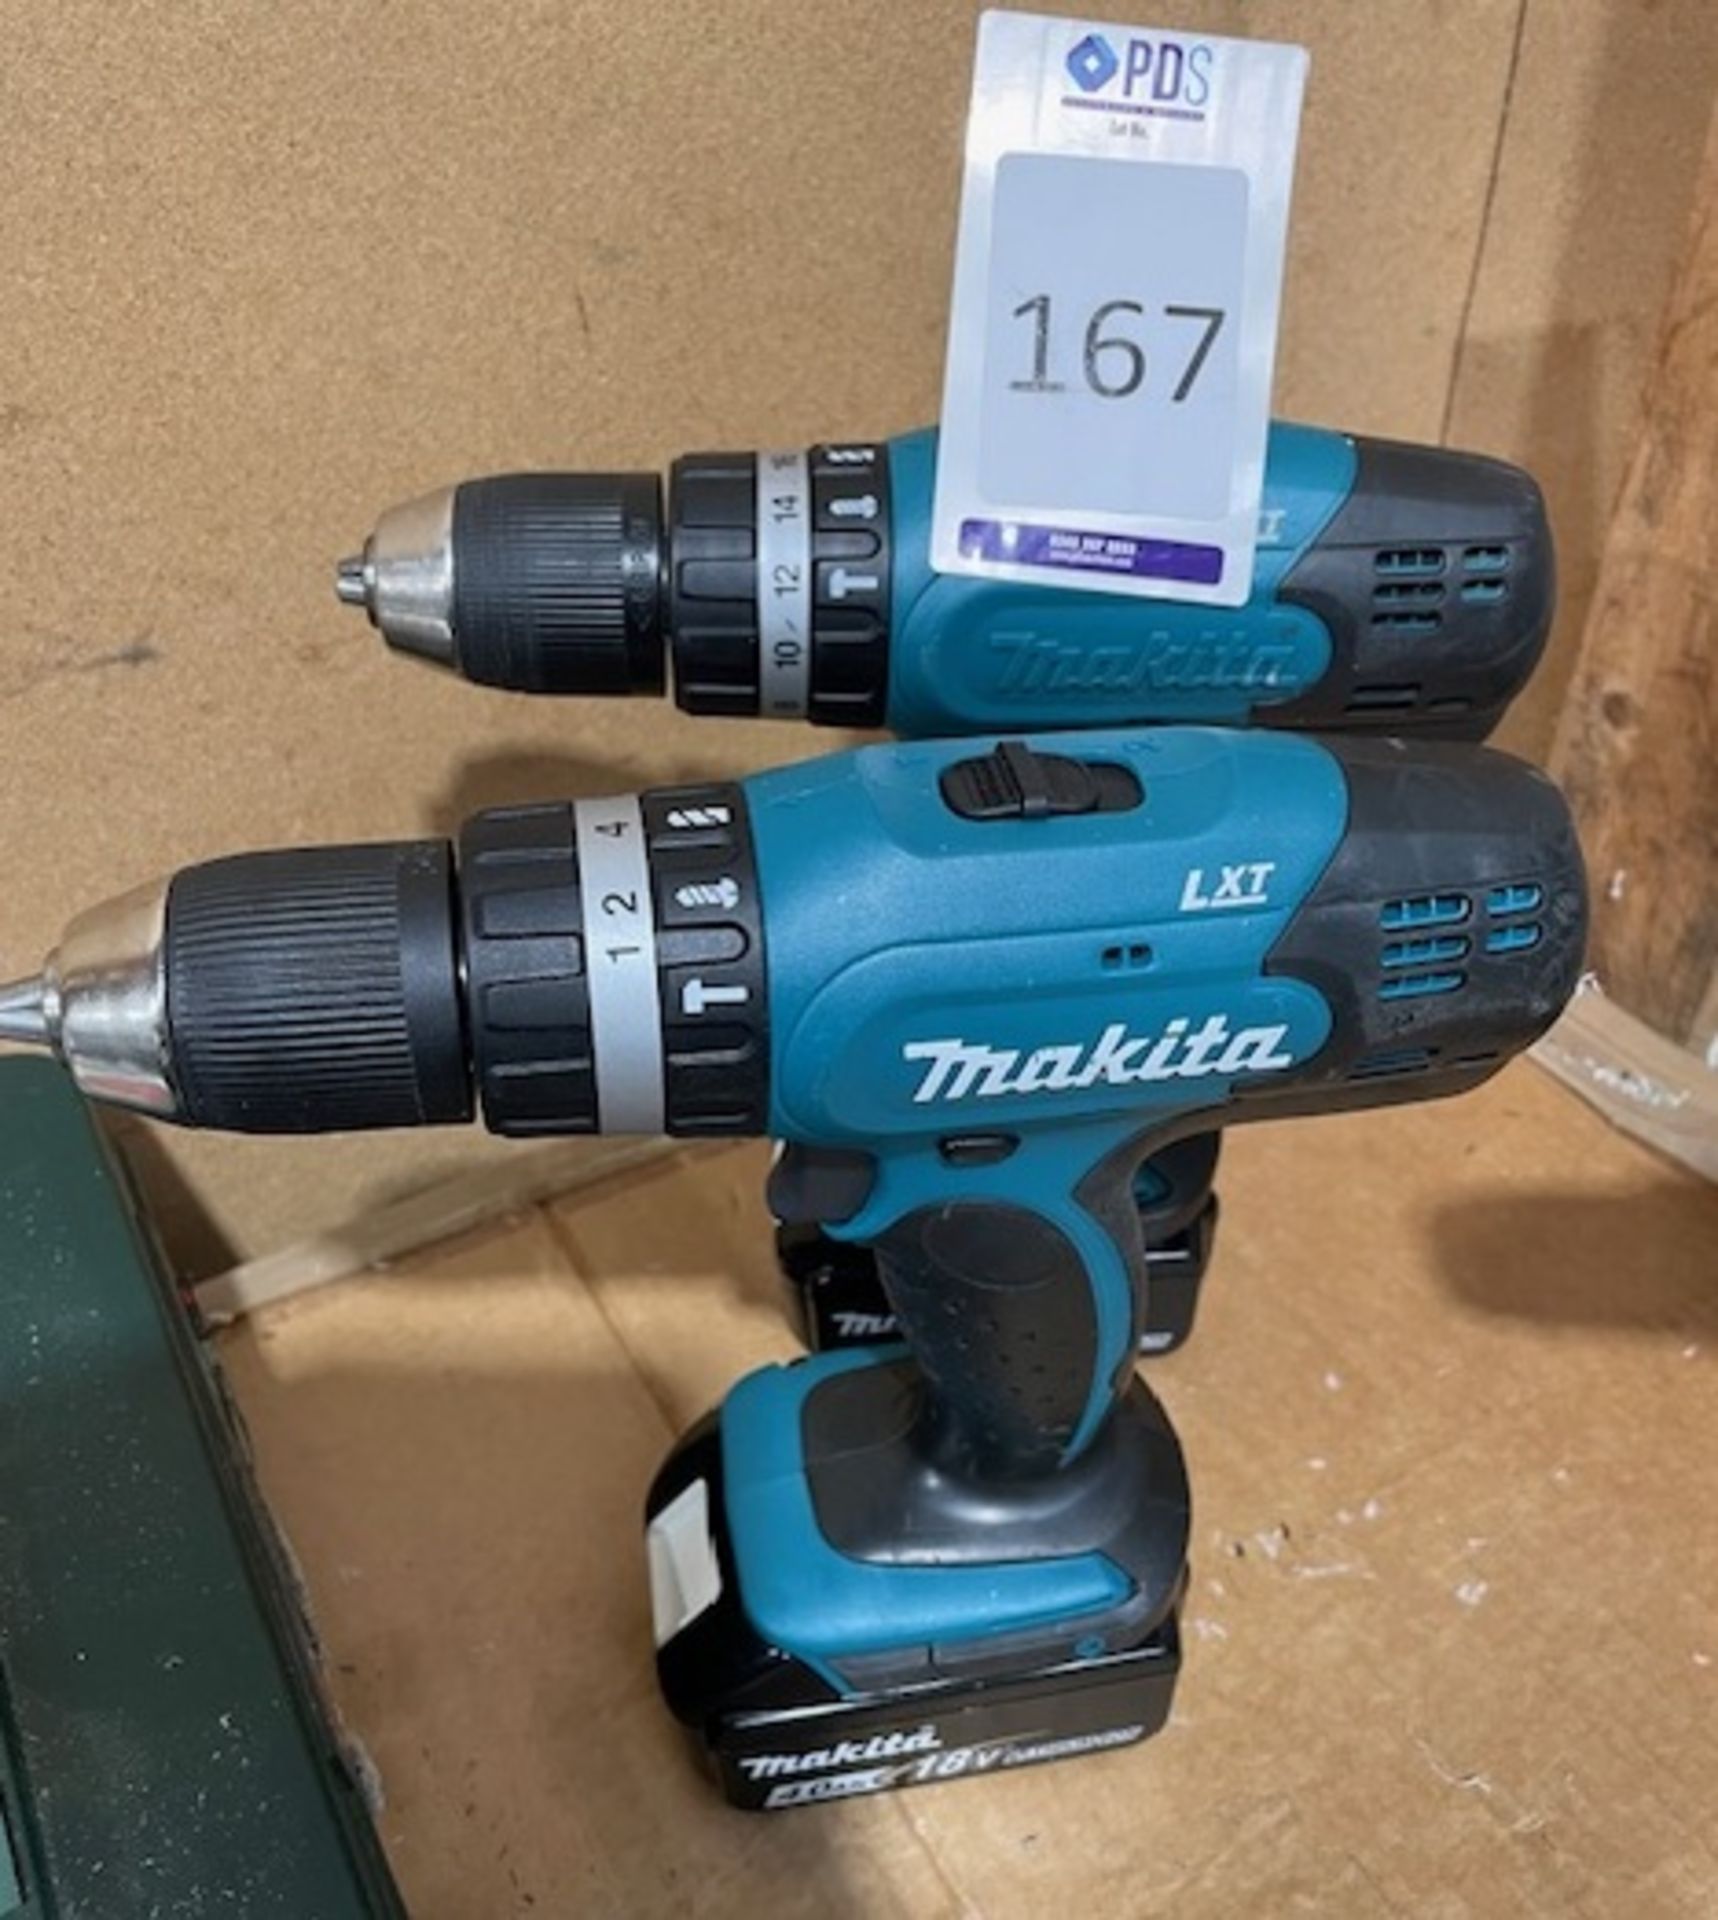 2 Makita LXT DHP453 Cordless Drills with Batteries, 18v (Location: Earls Barton. Please Refer to